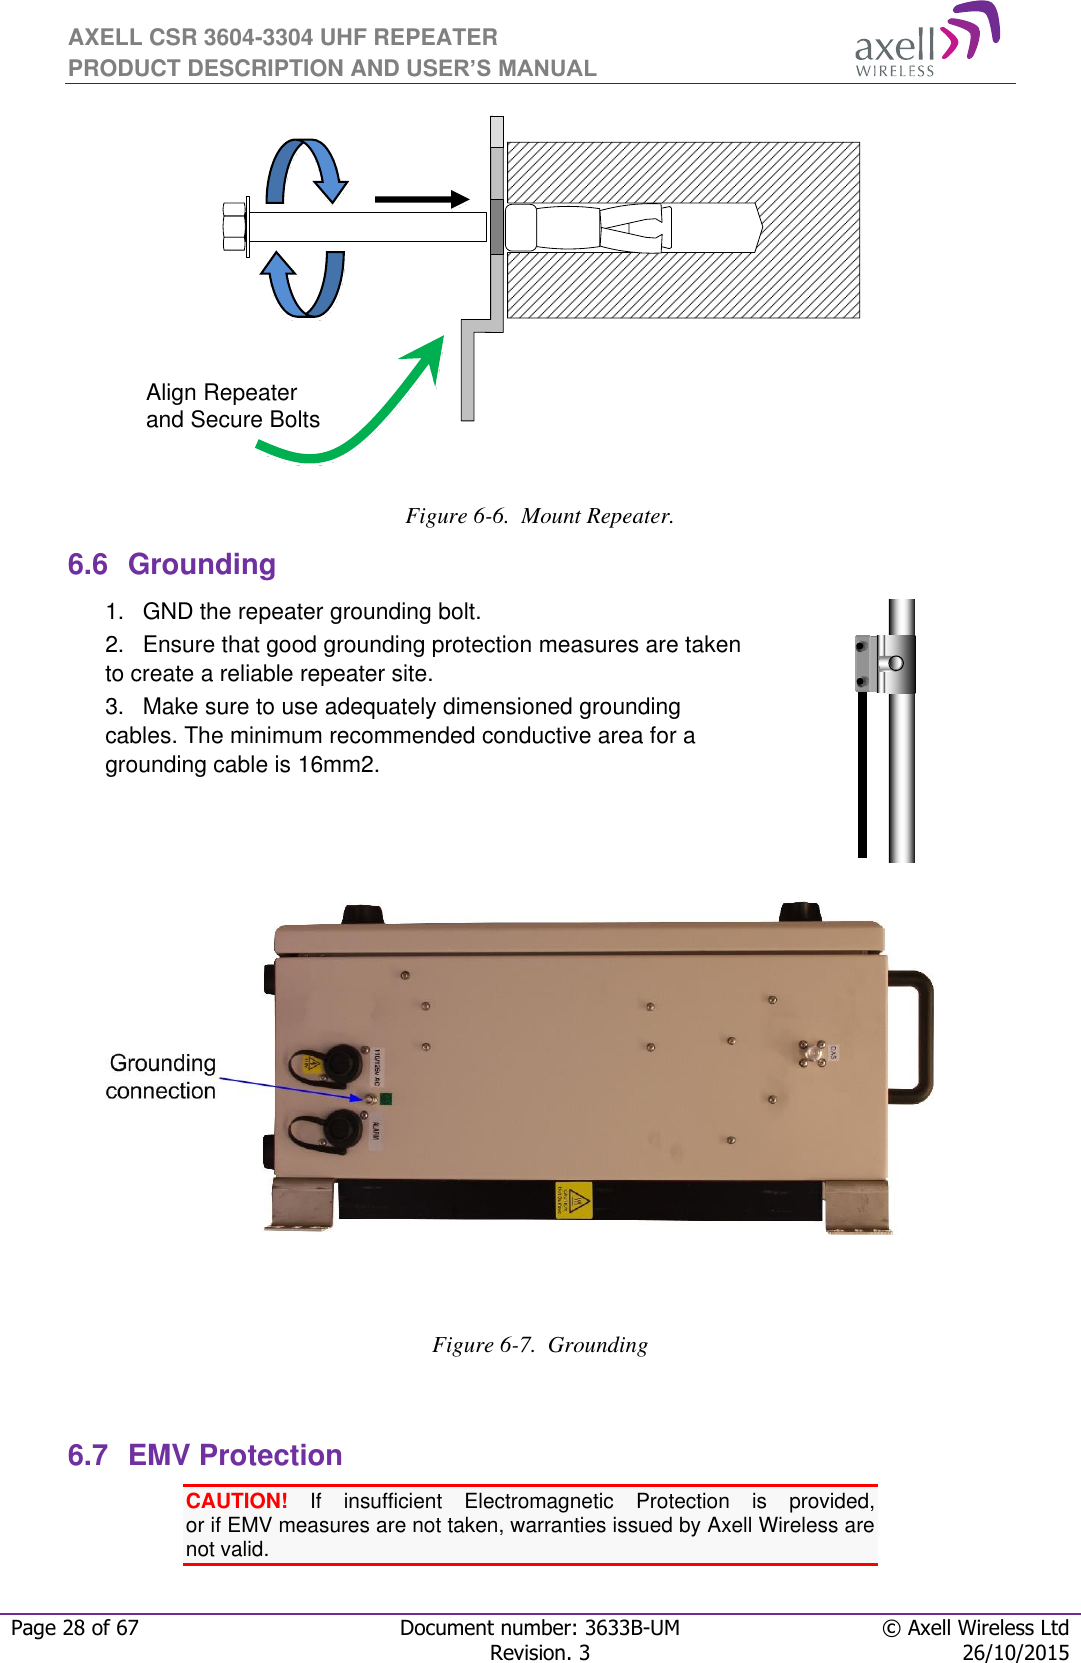 AXELL CSR 3604-3304 UHF REPEATER PRODUCT DESCRIPTION AND USER’S MANUAL  Page 28 of 67 Document number: 3633B-UM © Axell Wireless Ltd  Revision. 3 26/10/2015     Figure 6-6.  Mount Repeater. 6.6  Grounding 1.  GND the repeater grounding bolt. 2.  Ensure that good grounding protection measures are taken to create a reliable repeater site.  3.  Make sure to use adequately dimensioned grounding cables. The minimum recommended conductive area for a grounding cable is 16mm2.           Figure 6-7.  Grounding  6.7  EMV Protection CAUTION!  If  insufficient  Electromagnetic  Protection  is  provided,  or if EMV measures are not taken, warranties issued by Axell Wireless are not valid. Align Repeater and Secure Bolts 